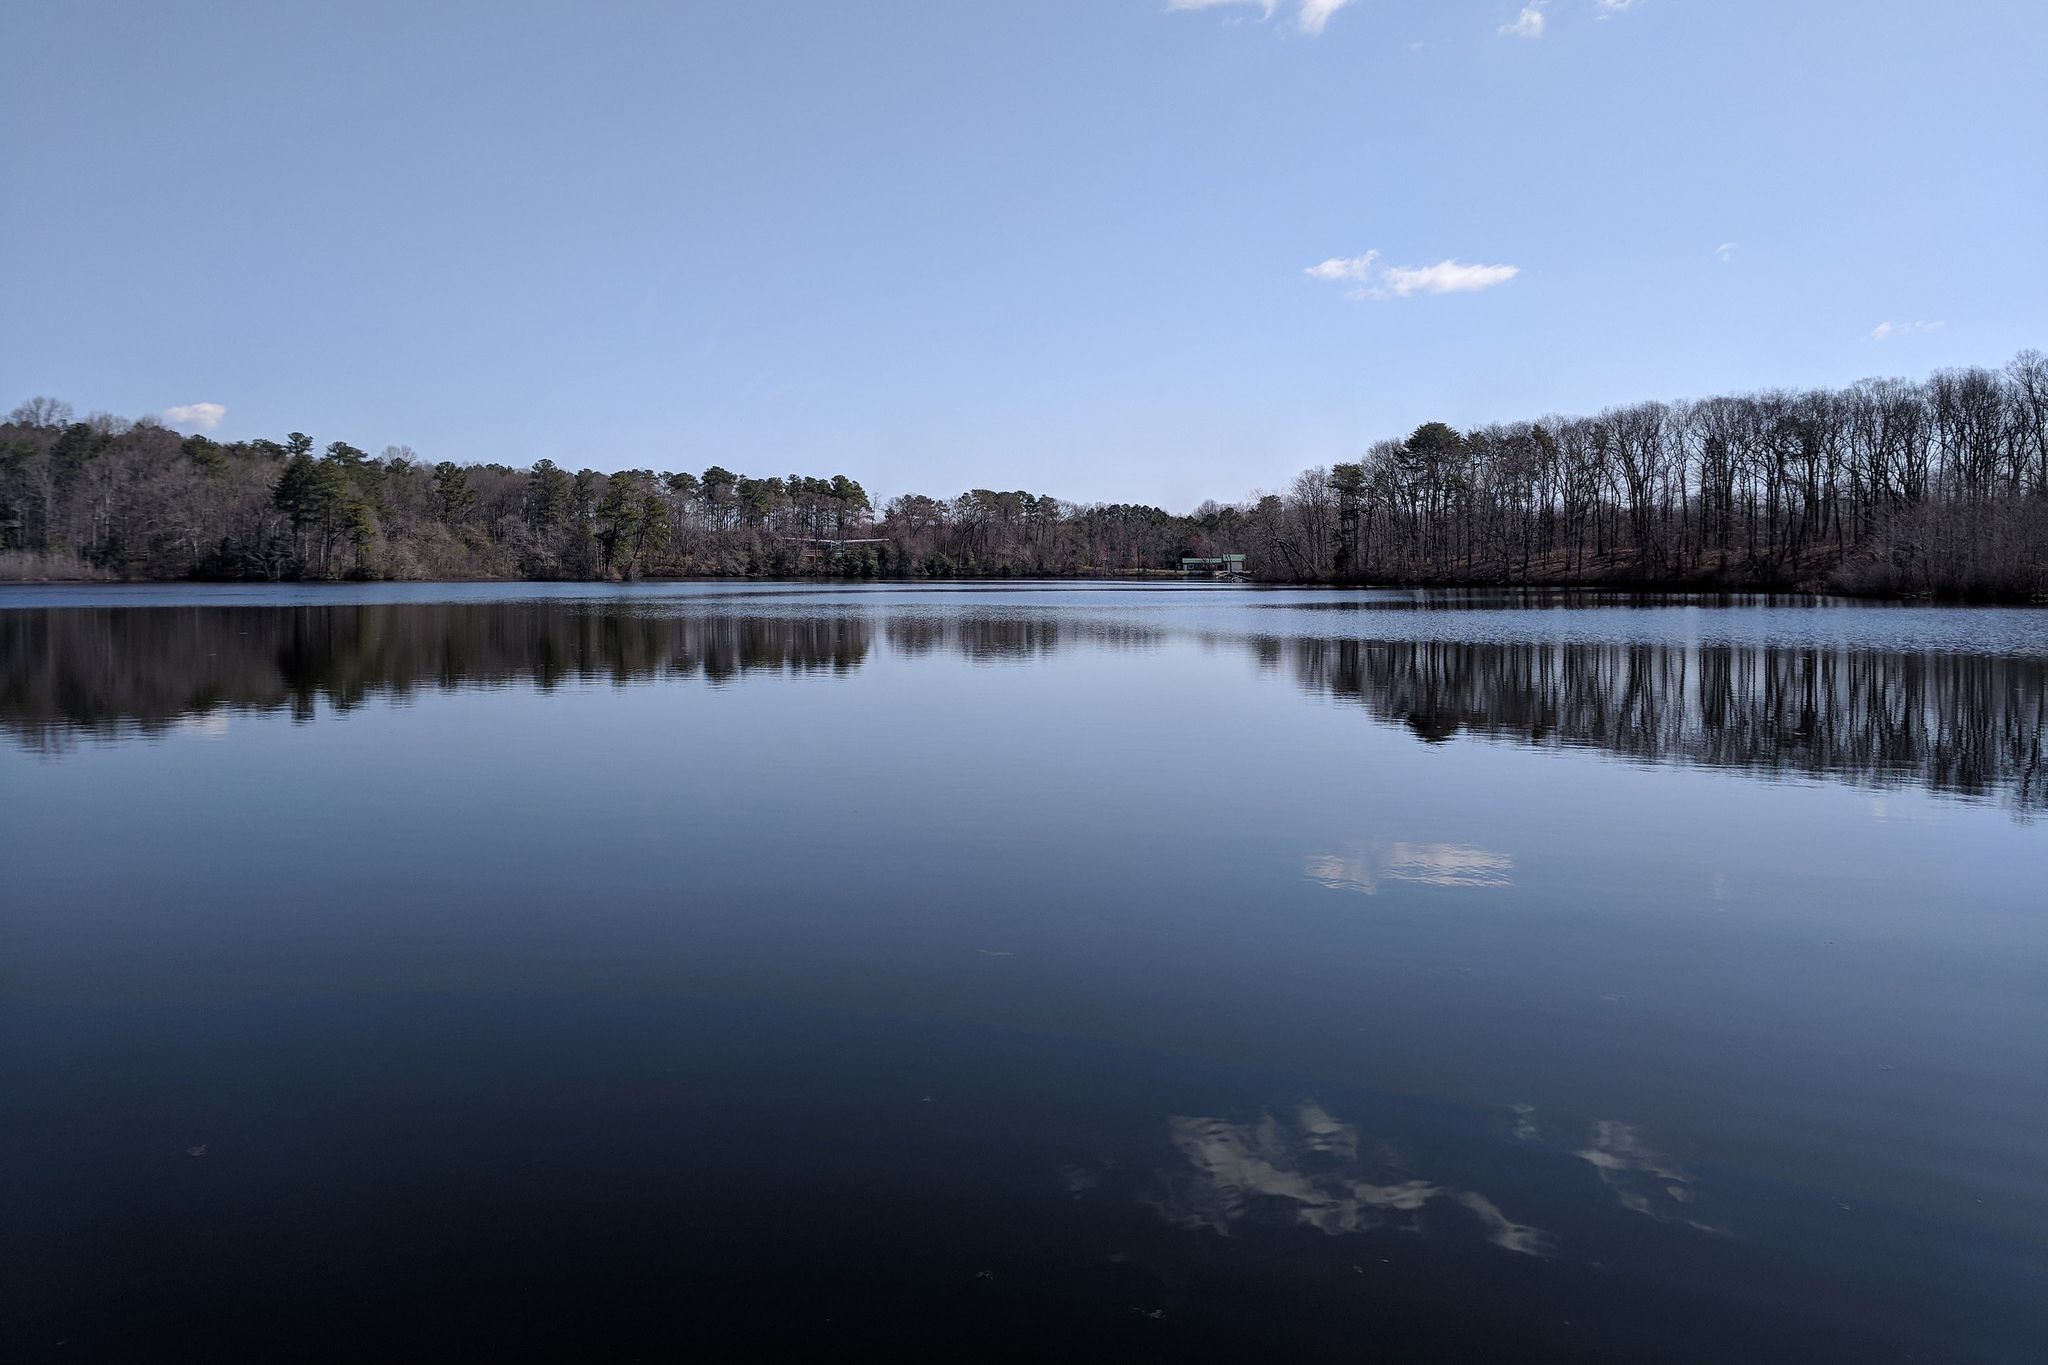 <p>The 66-acre millpond known as <a href="https://www.destateparks.com/PondsRivers/KillensPond">Killens Pond</a> is the centerpiece of the park that bears its name. Established at the end of the 18th century, the pond is home to pickerel, bluegills, carp, catfish, largemouth bass, crappie, and perch.</p>